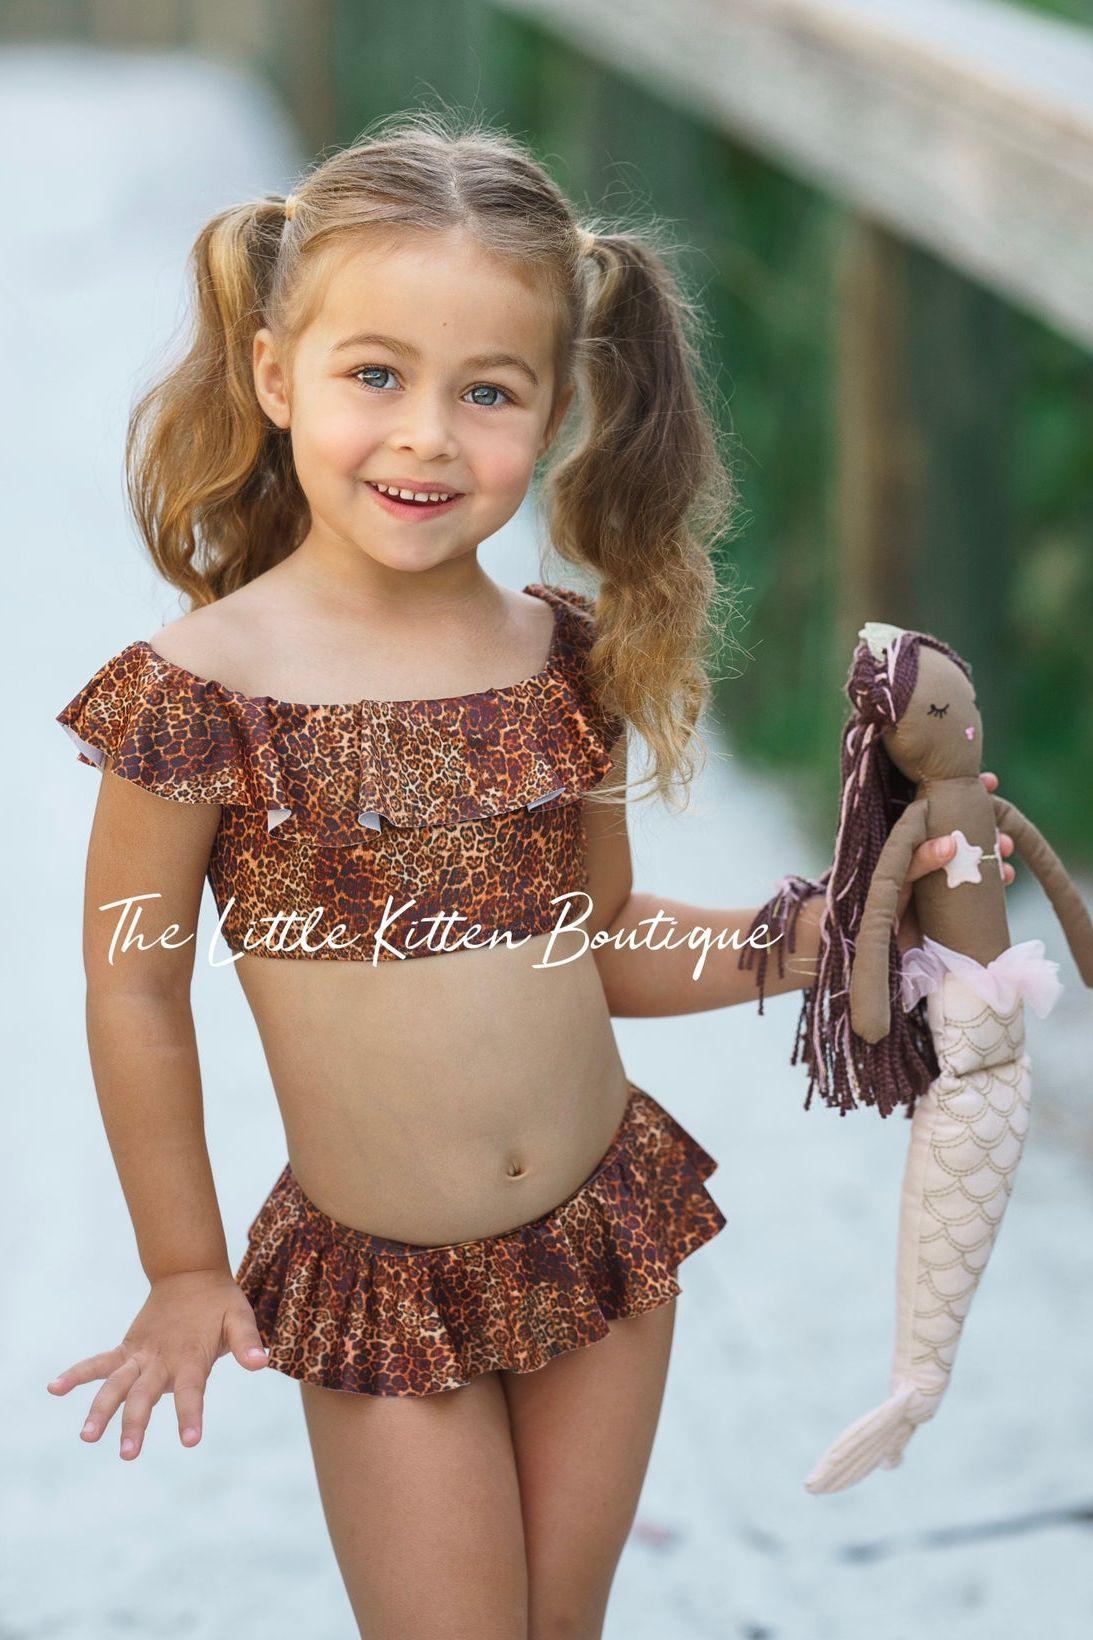 Children Swimsuits - Girls Two Piece Bathing Suit-Tie Front